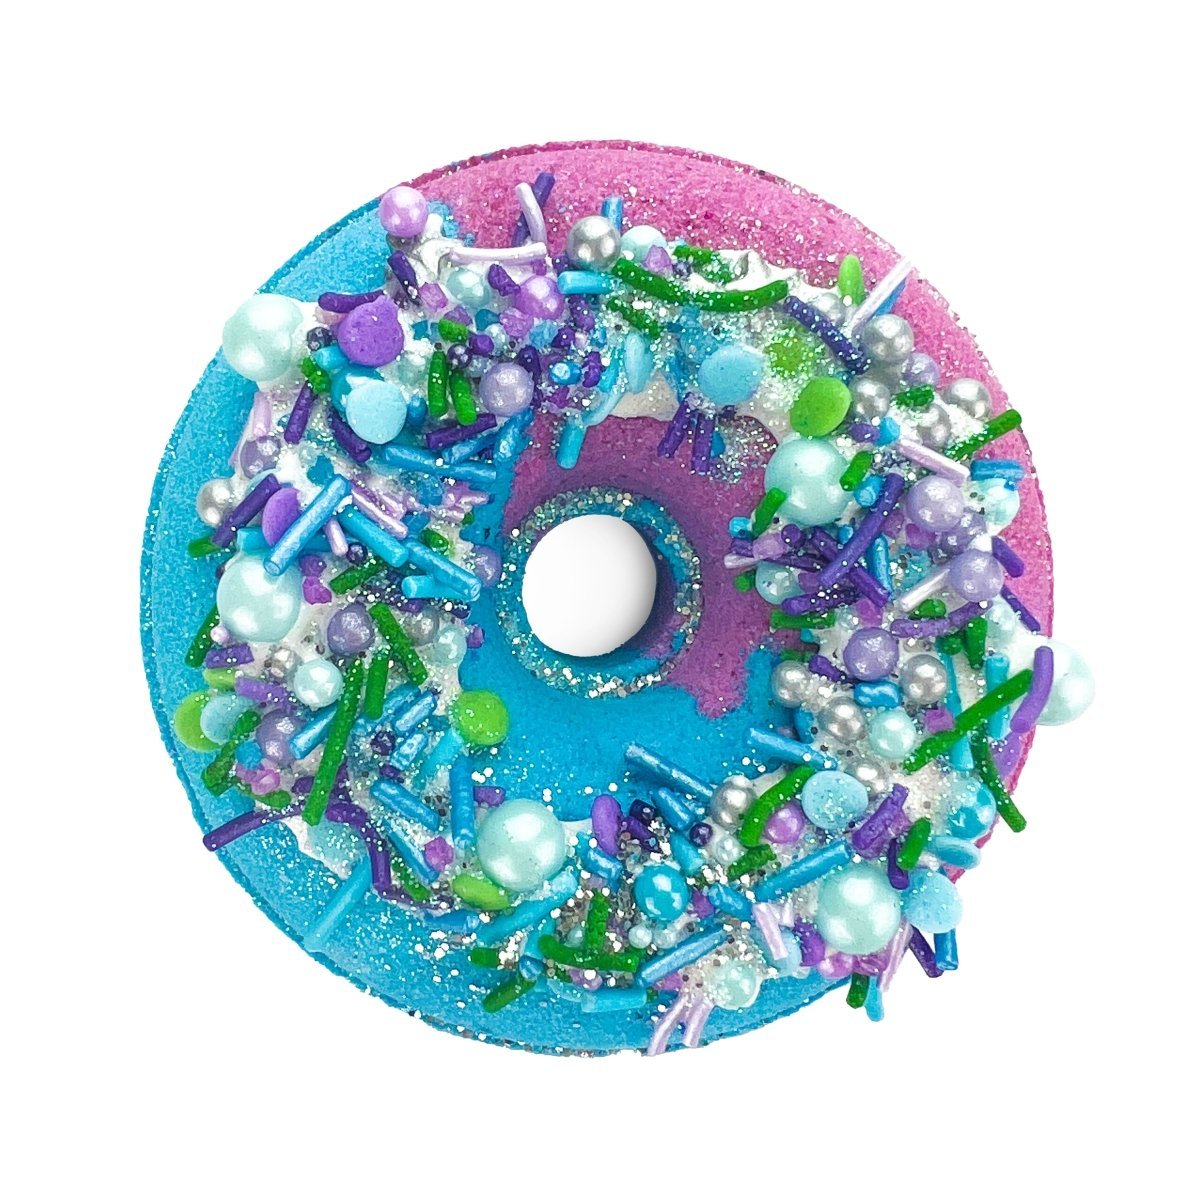 Blackcurrant Donut Bath Bomb for Kids & Adults - Colourful With Sprinkles & Fruit Fragrance - Made in Australia by Bath Box